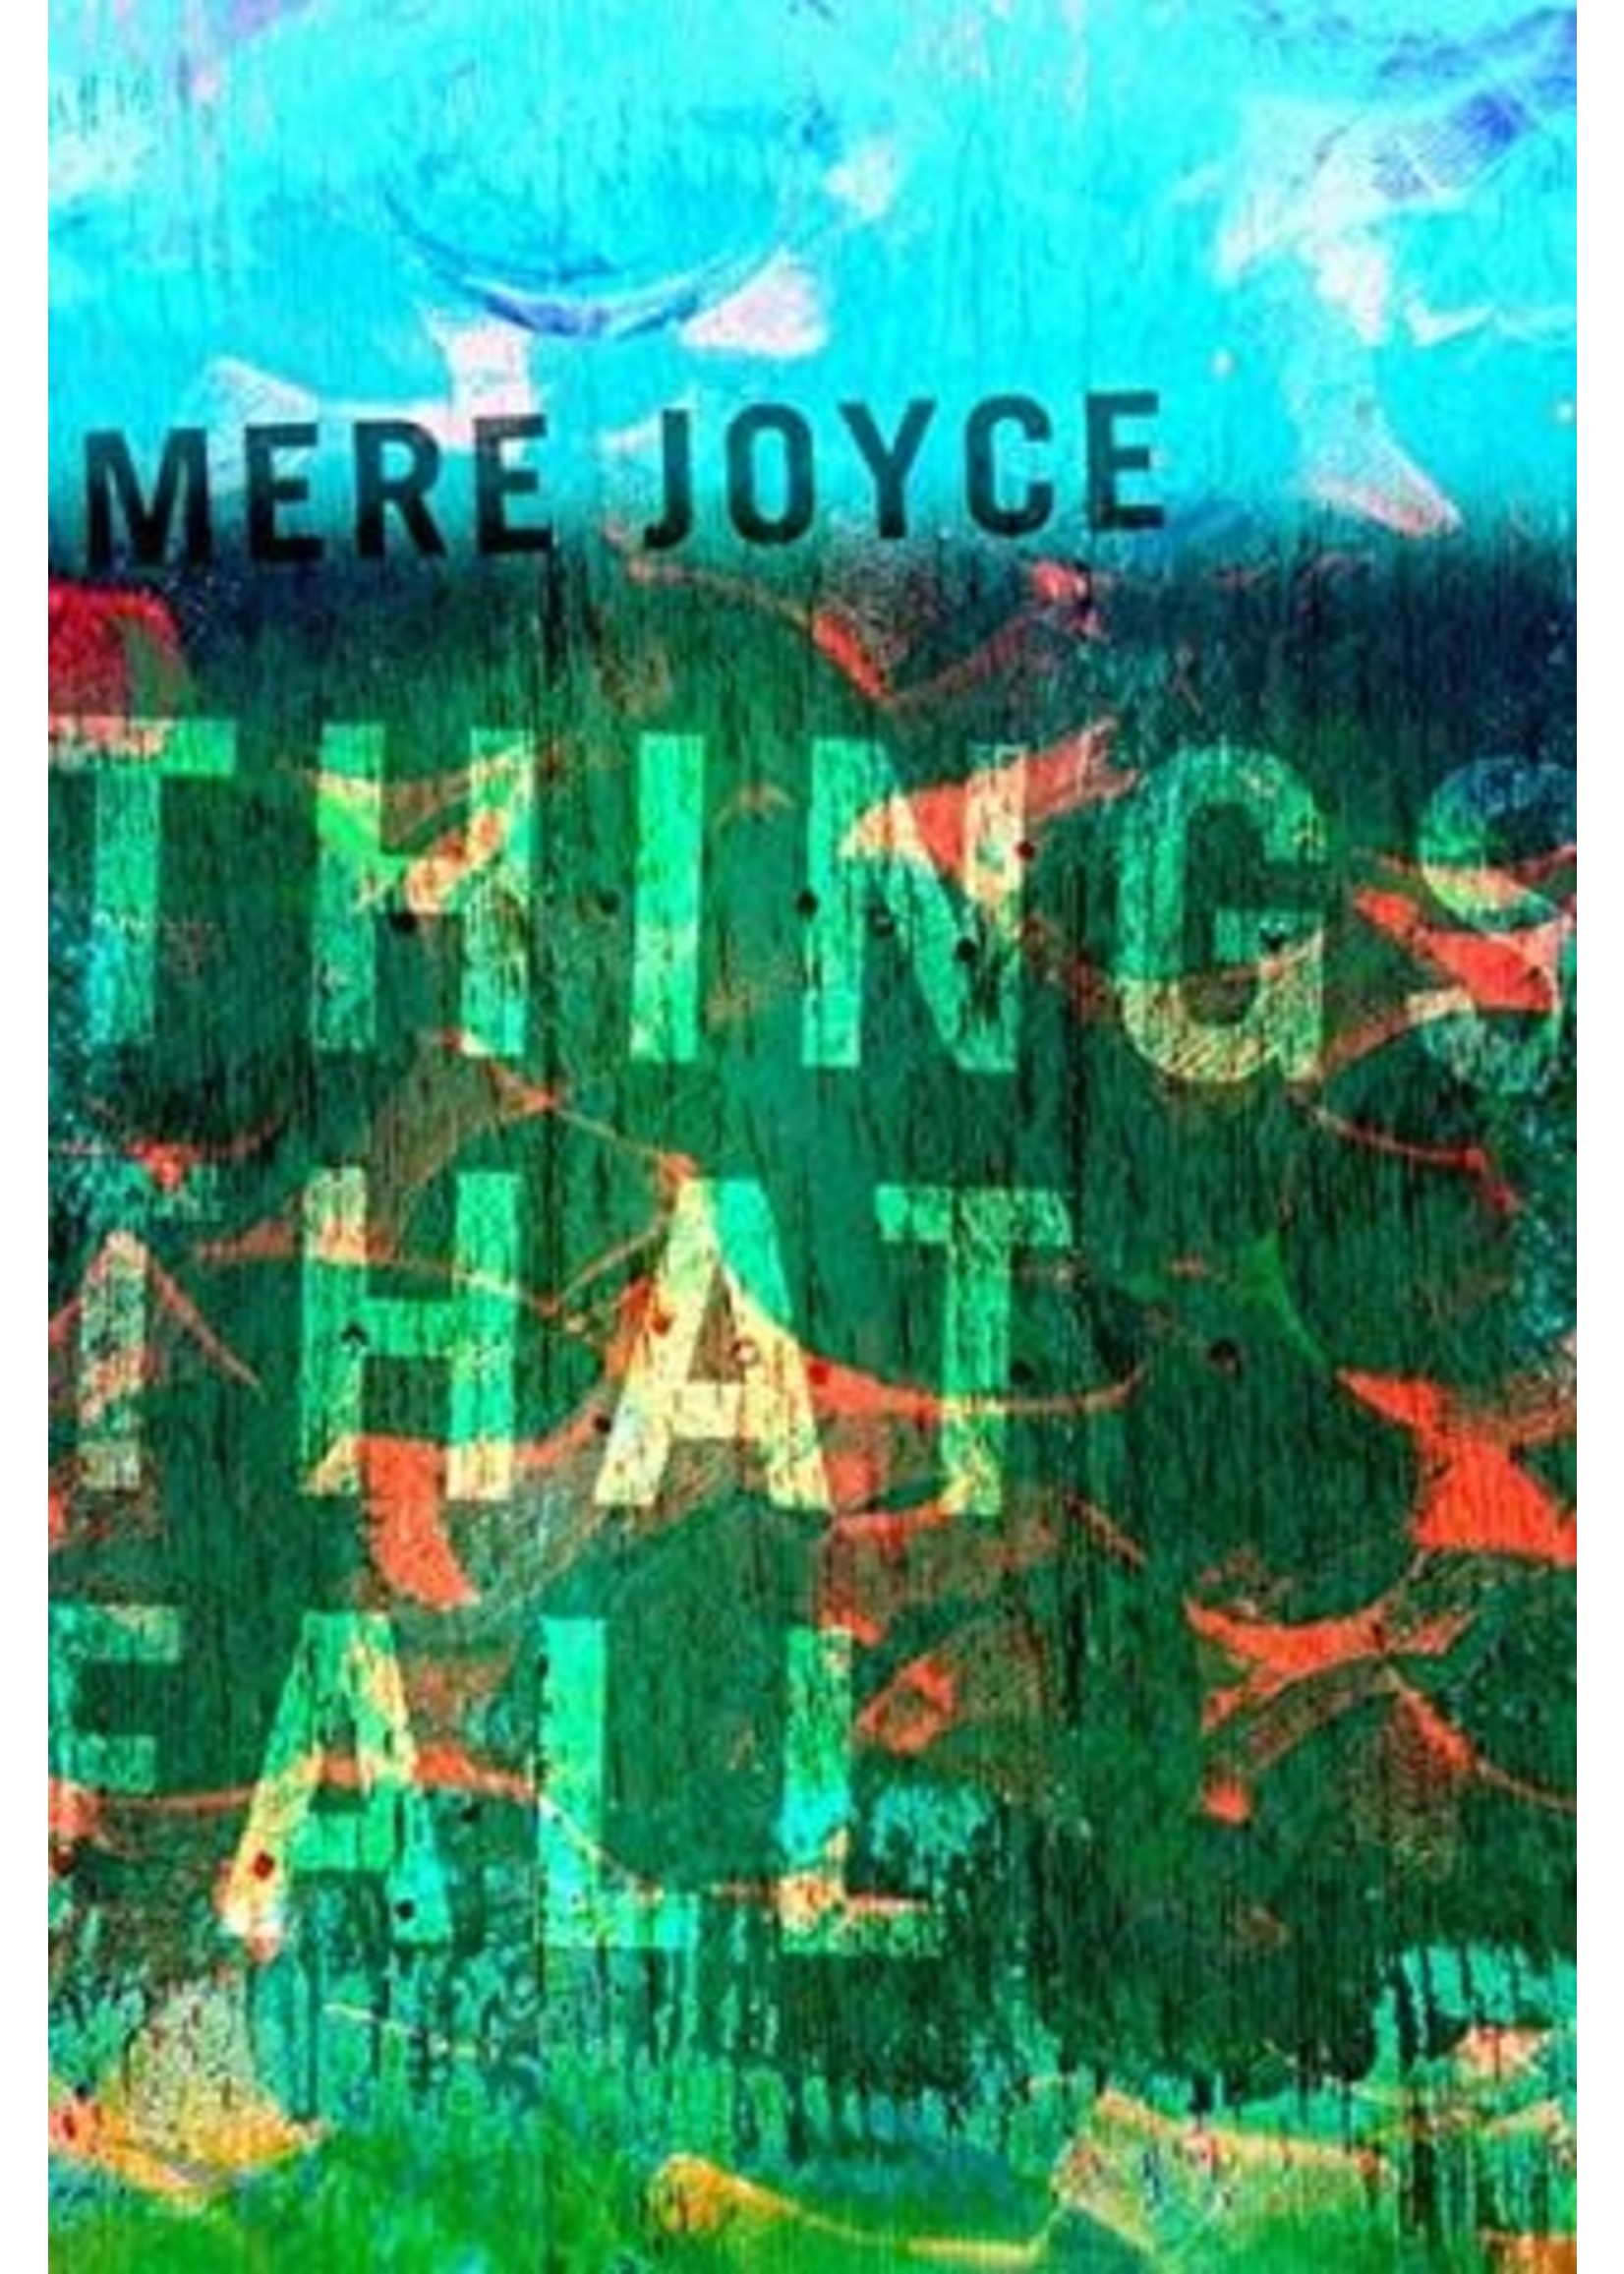 Things That Fall by Mere Joyce